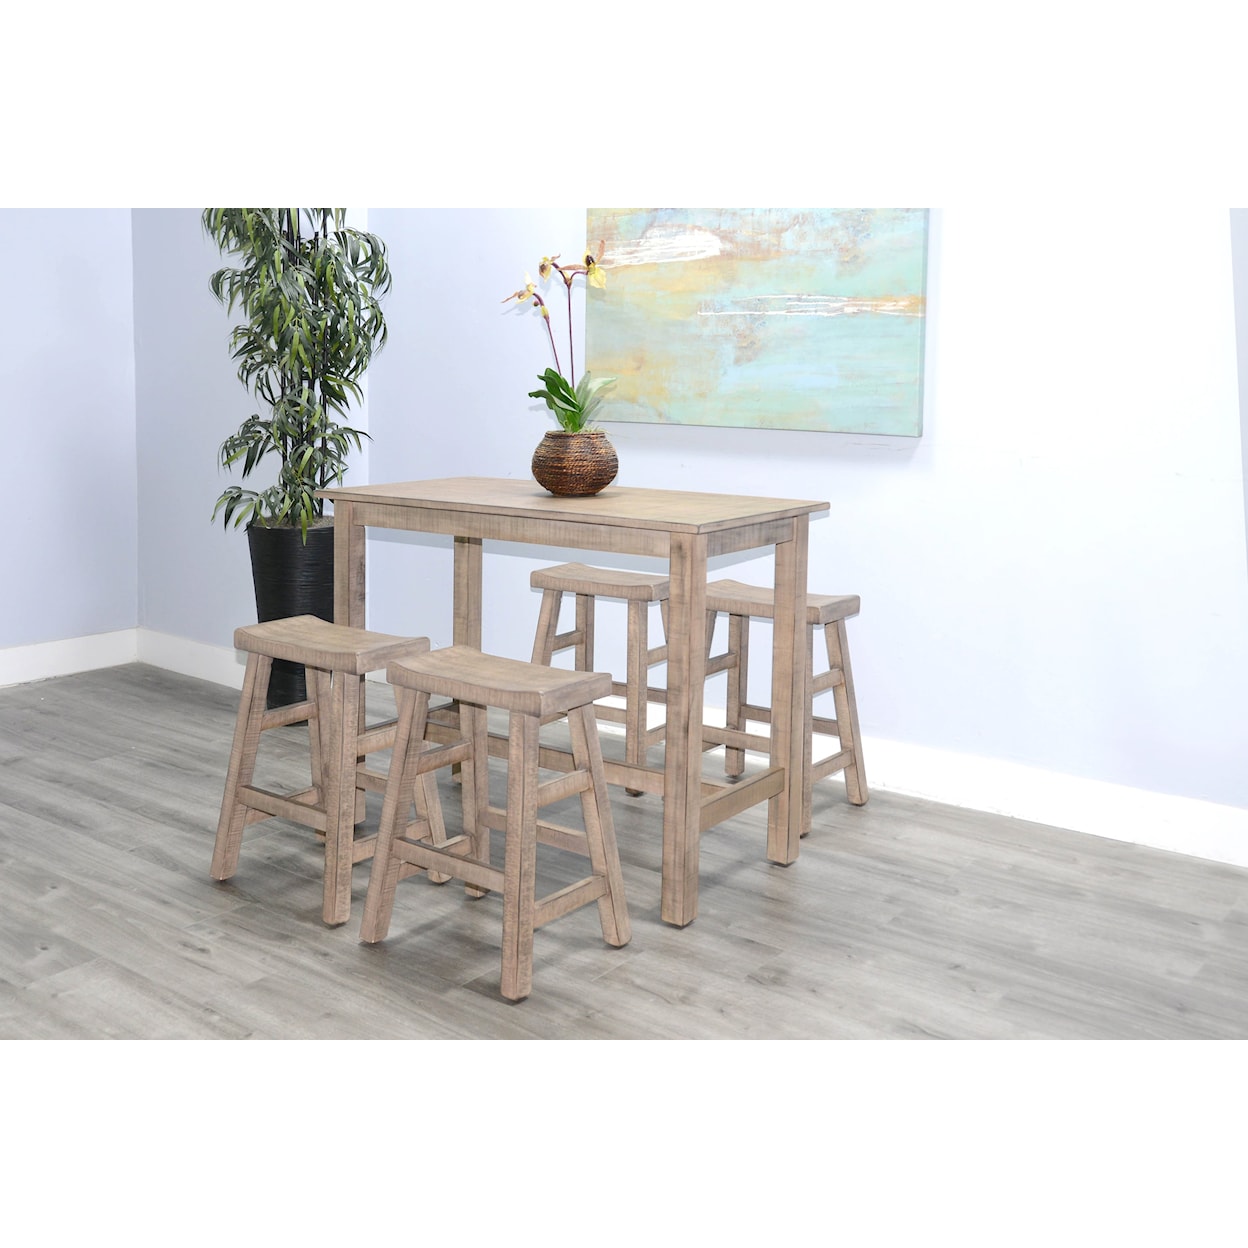 Sunny Designs Marina Wood Counter-Height Dining Table